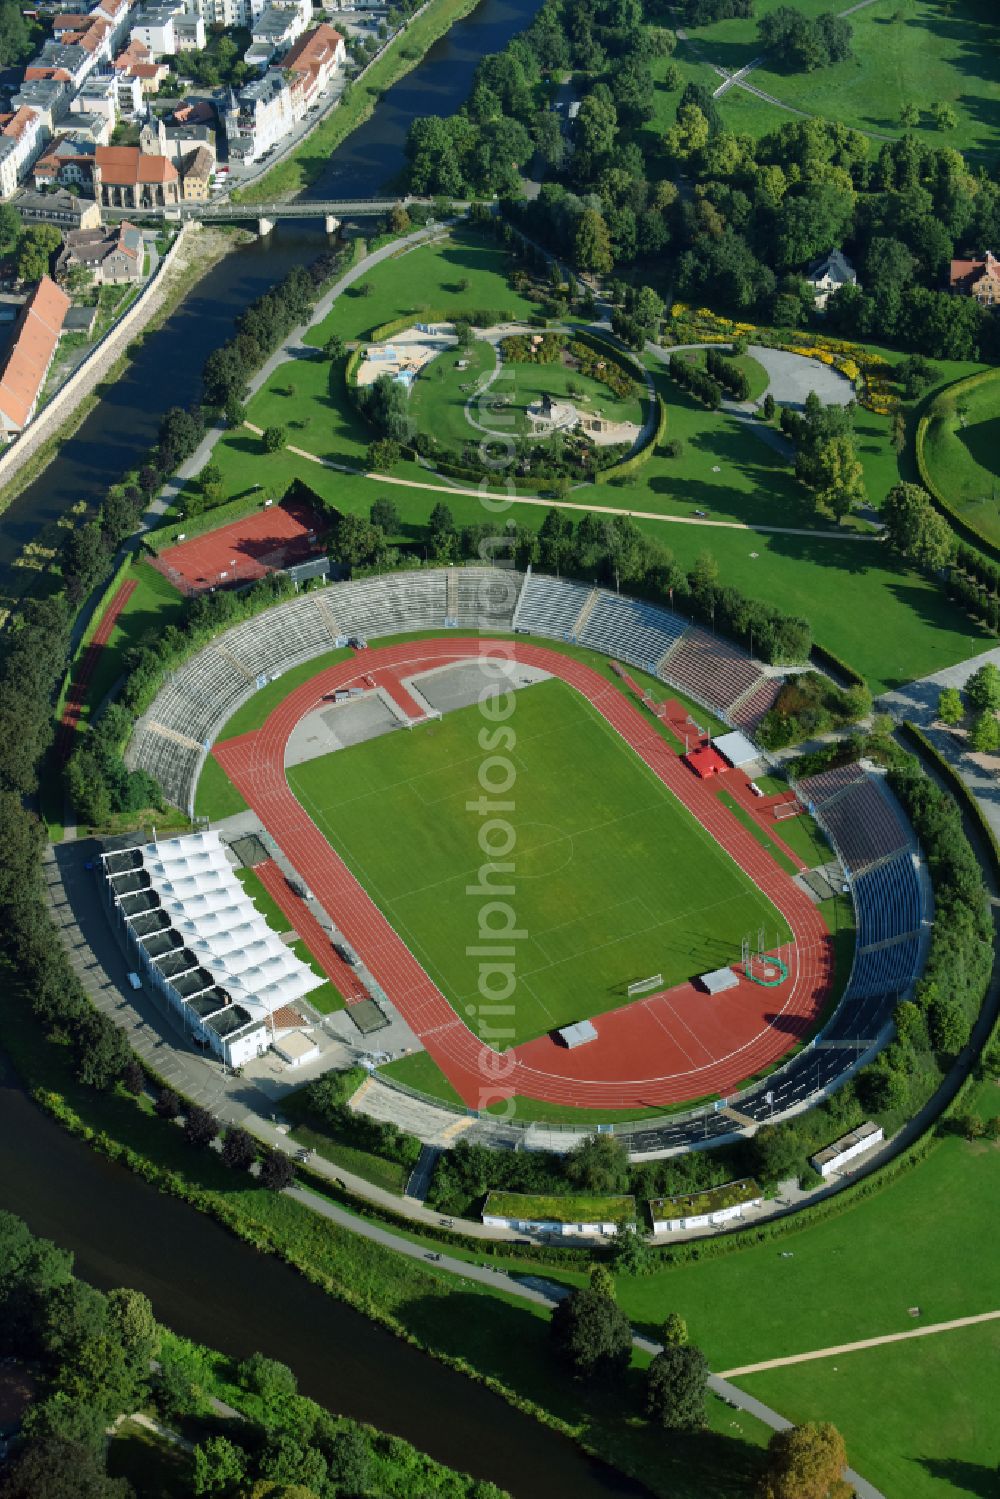 Gera from the bird's eye view: Sports facility grounds of the Arena stadium Stadion of Freandschaft of BSG Wismut Gera in Gera in the state Thuringia, Germany